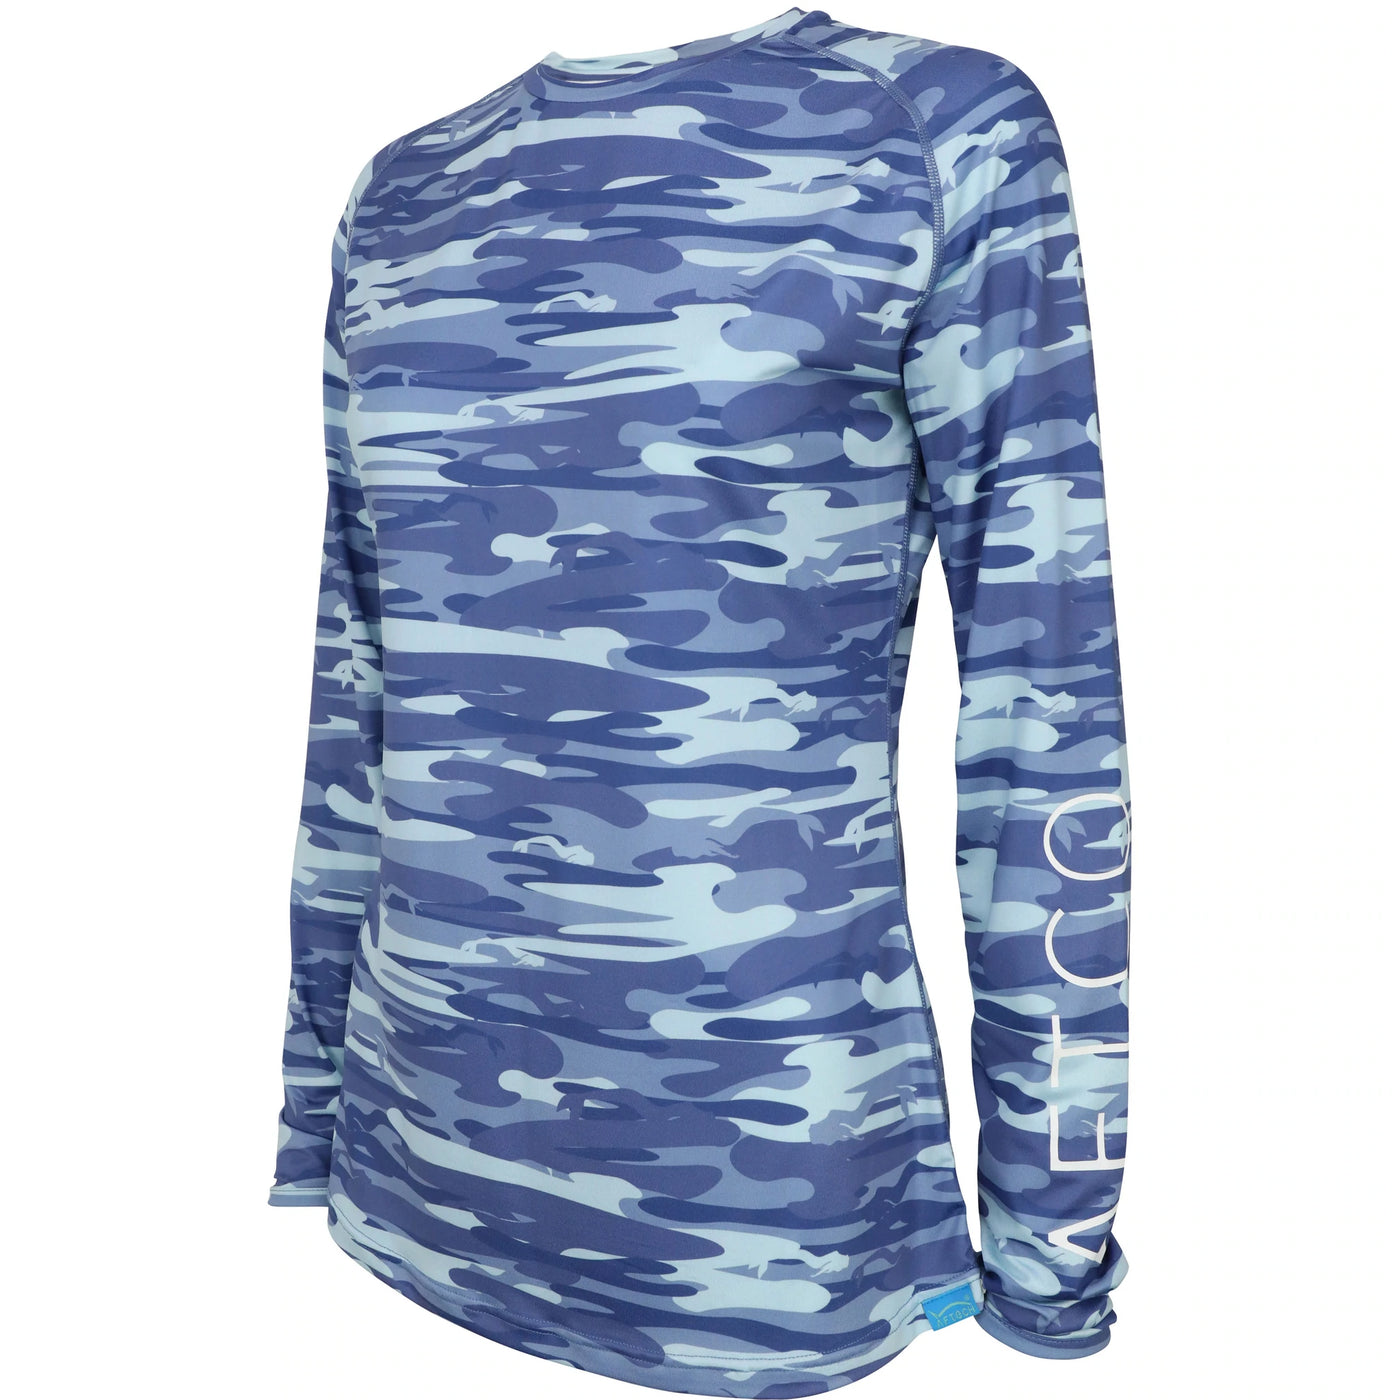 Aftco Women's Mercam Performance L/S Shirt-WOMENS CLOTHING-Blue Camo-XS-Kevin's Fine Outdoor Gear & Apparel